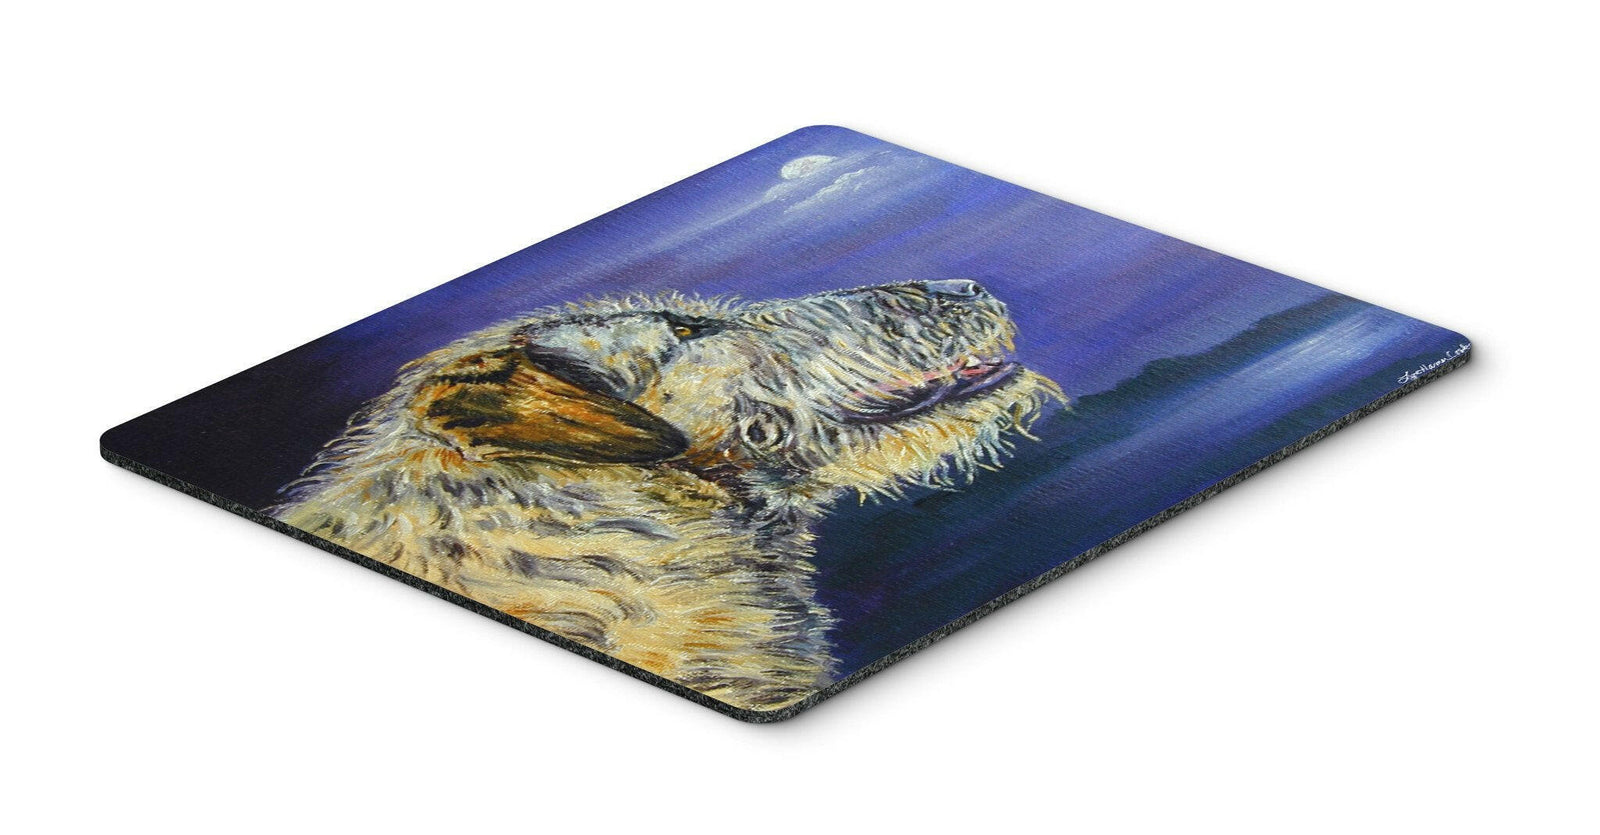 Irish Wolfhound Looking Mouse Pad, Hot Pad or Trivet 7352MP by Caroline's Treasures